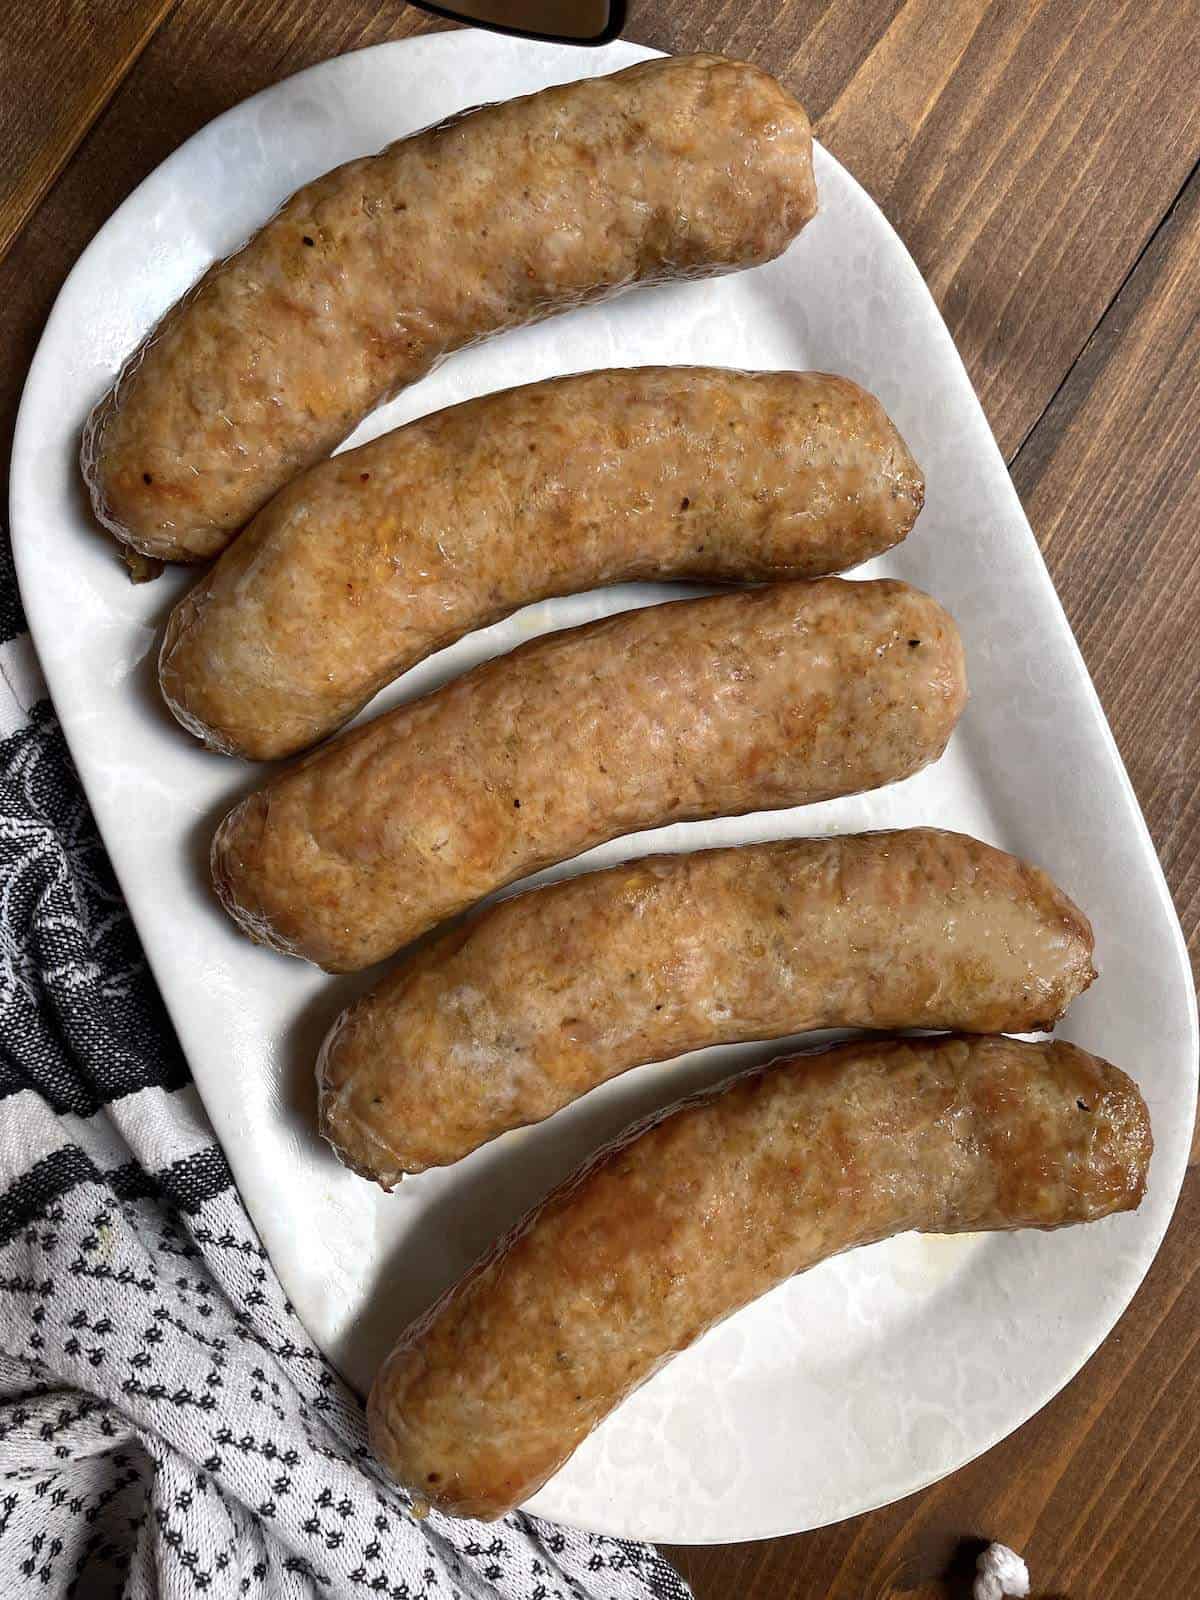 Whole cooked air fried Italian sausages on a white plate.